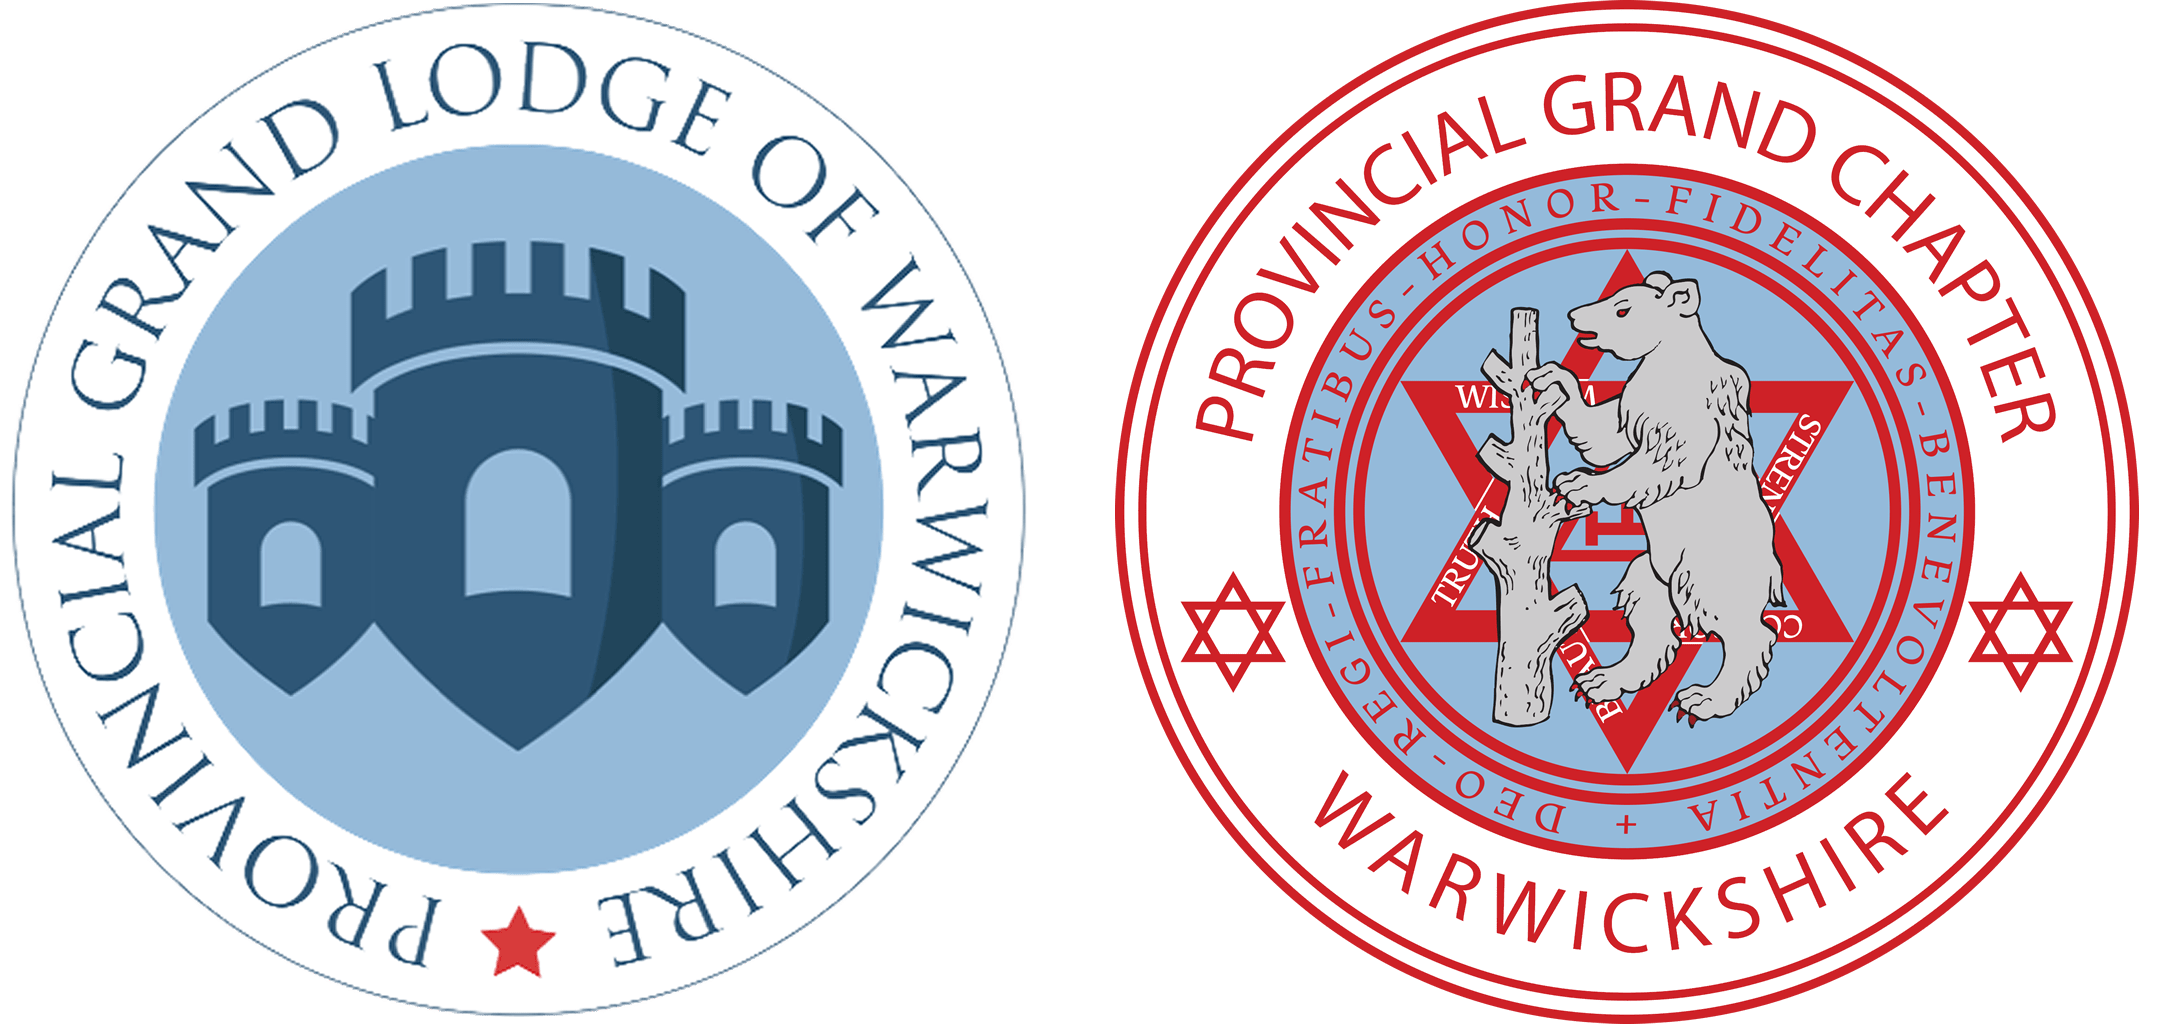 Warwickshire Provincial Grand Lodge and Warwickshire Provincial Grand Chapter logos side by side